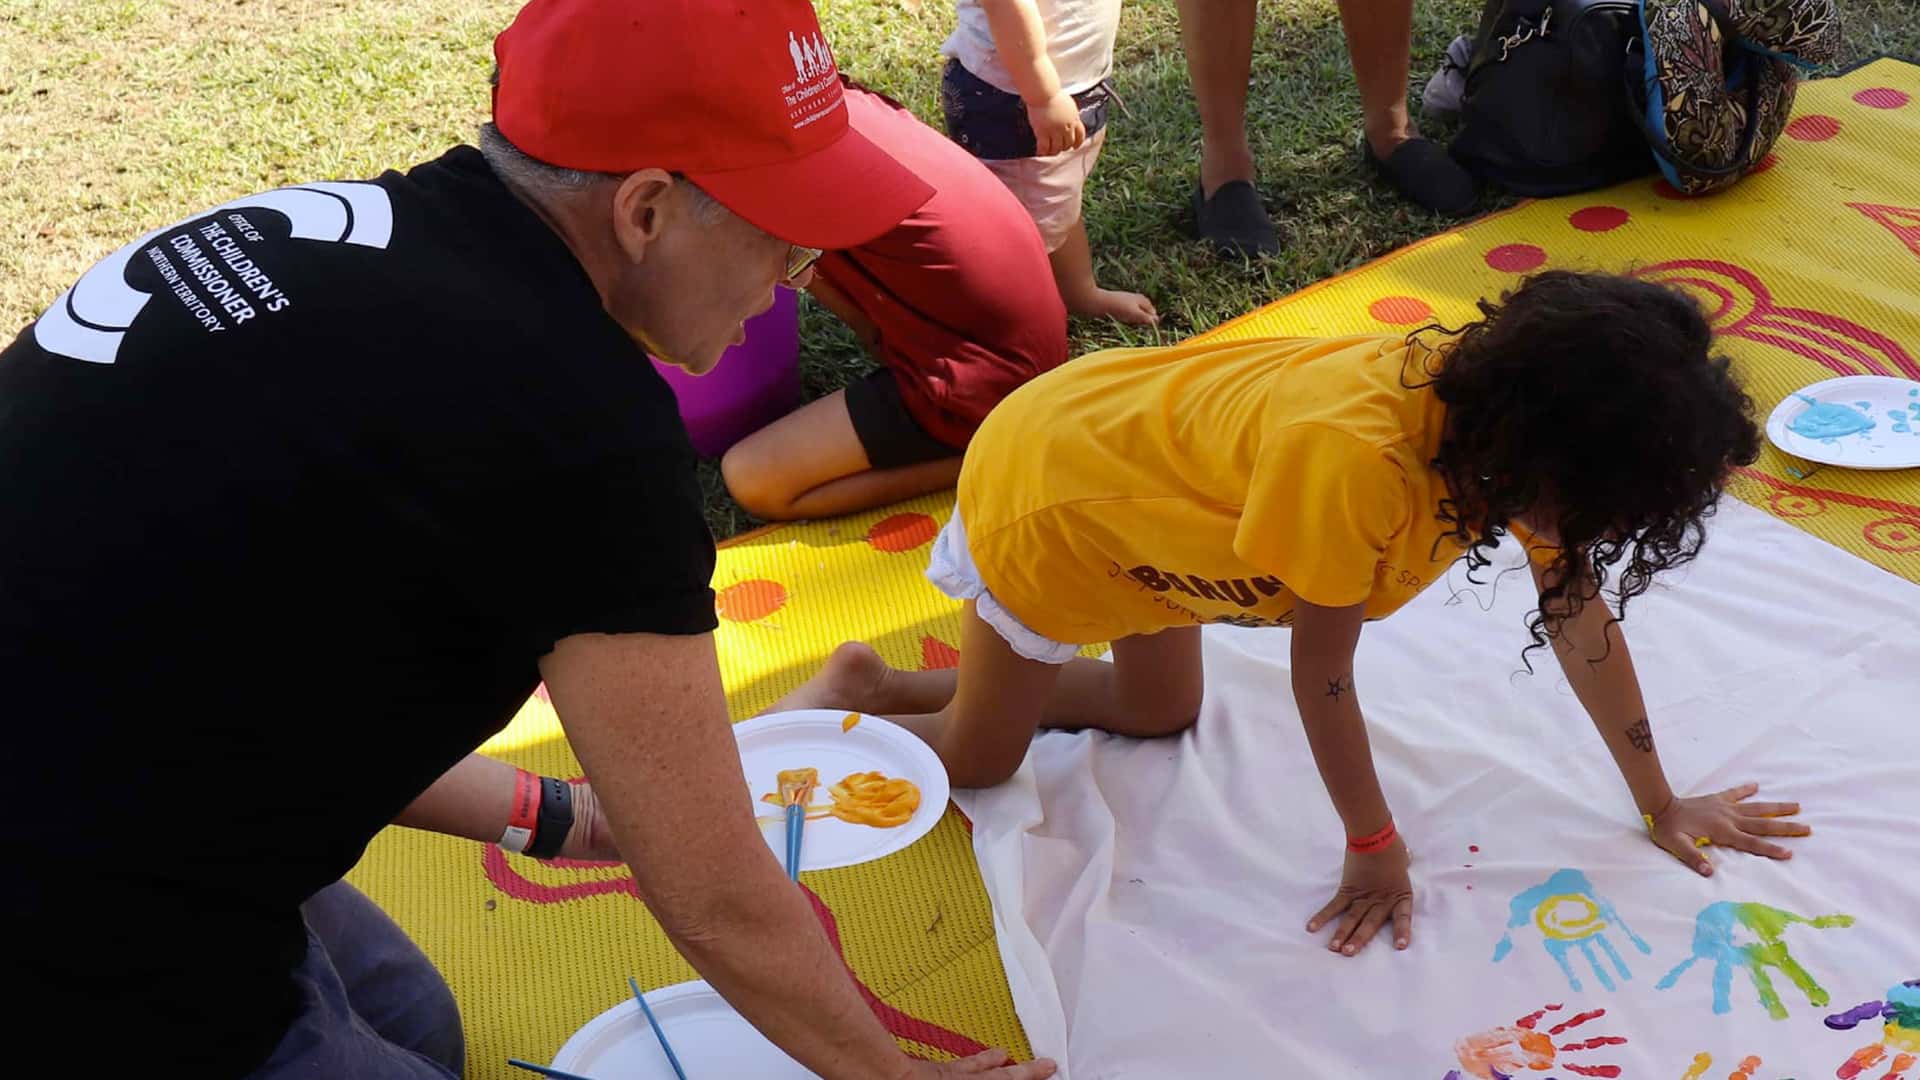 Children making a banner with paint on hands